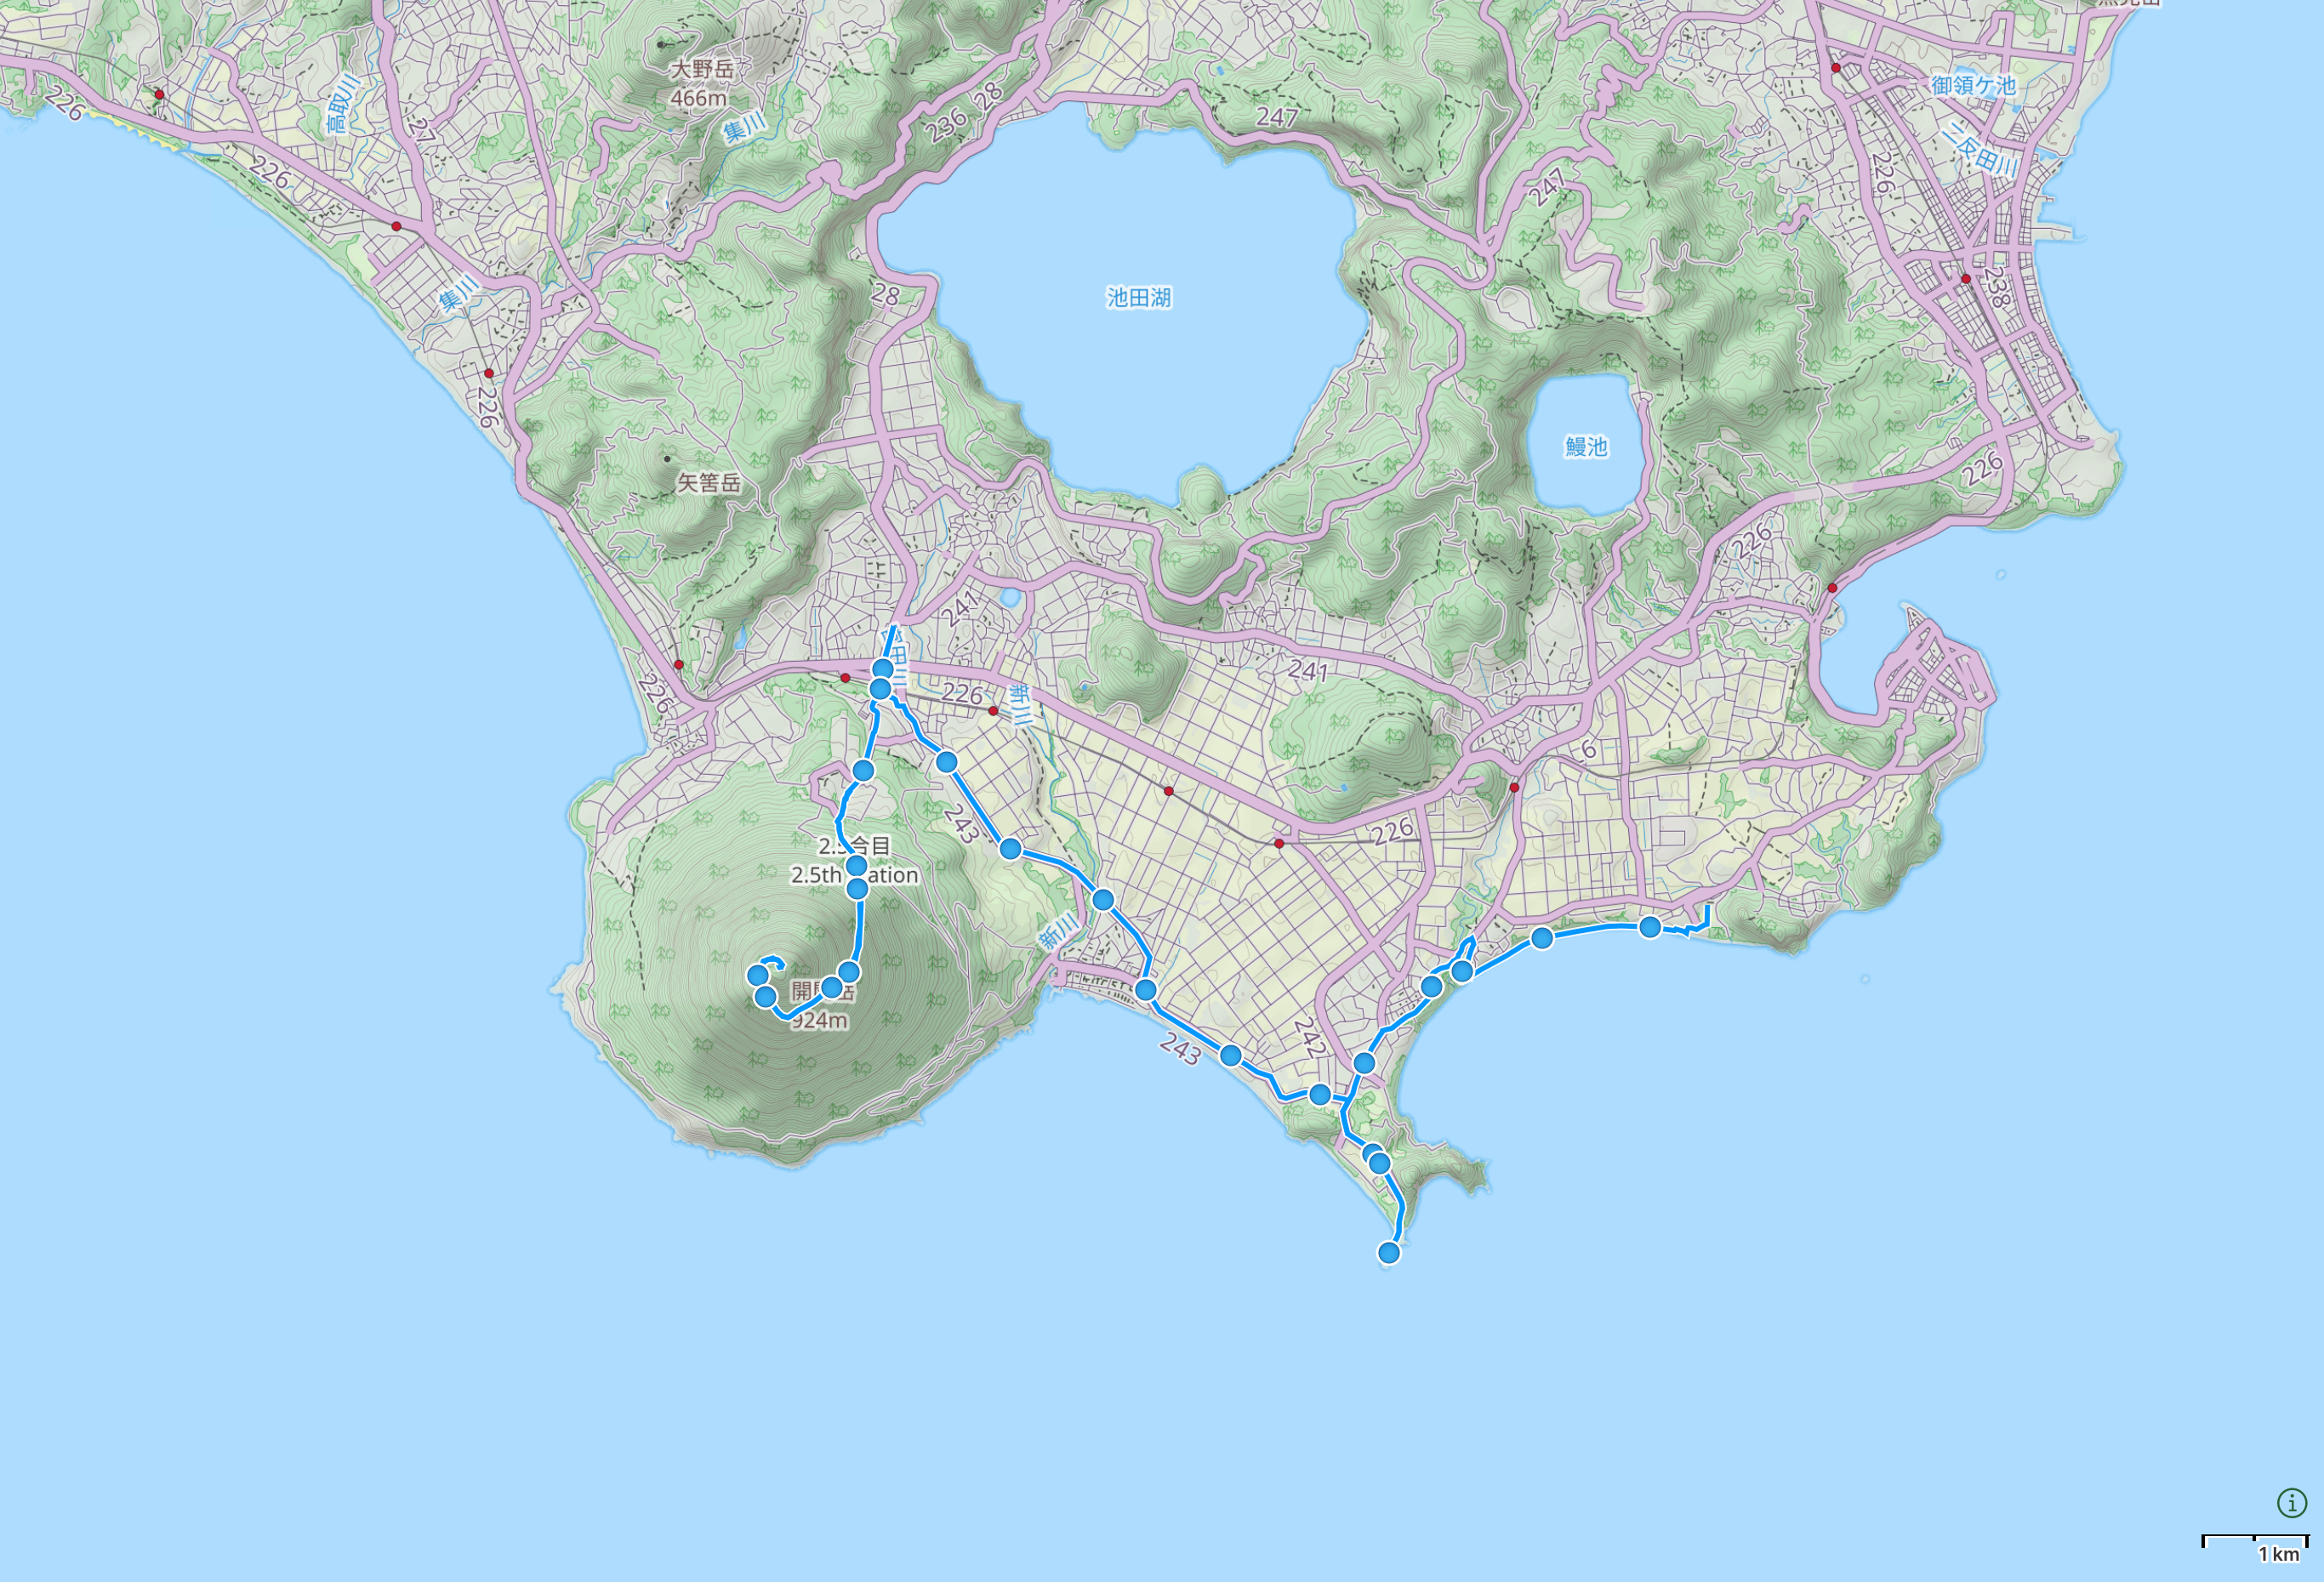 Map of Kagoshima Prefecture with author’s route between Kaimon and Yamakawa highlighted.